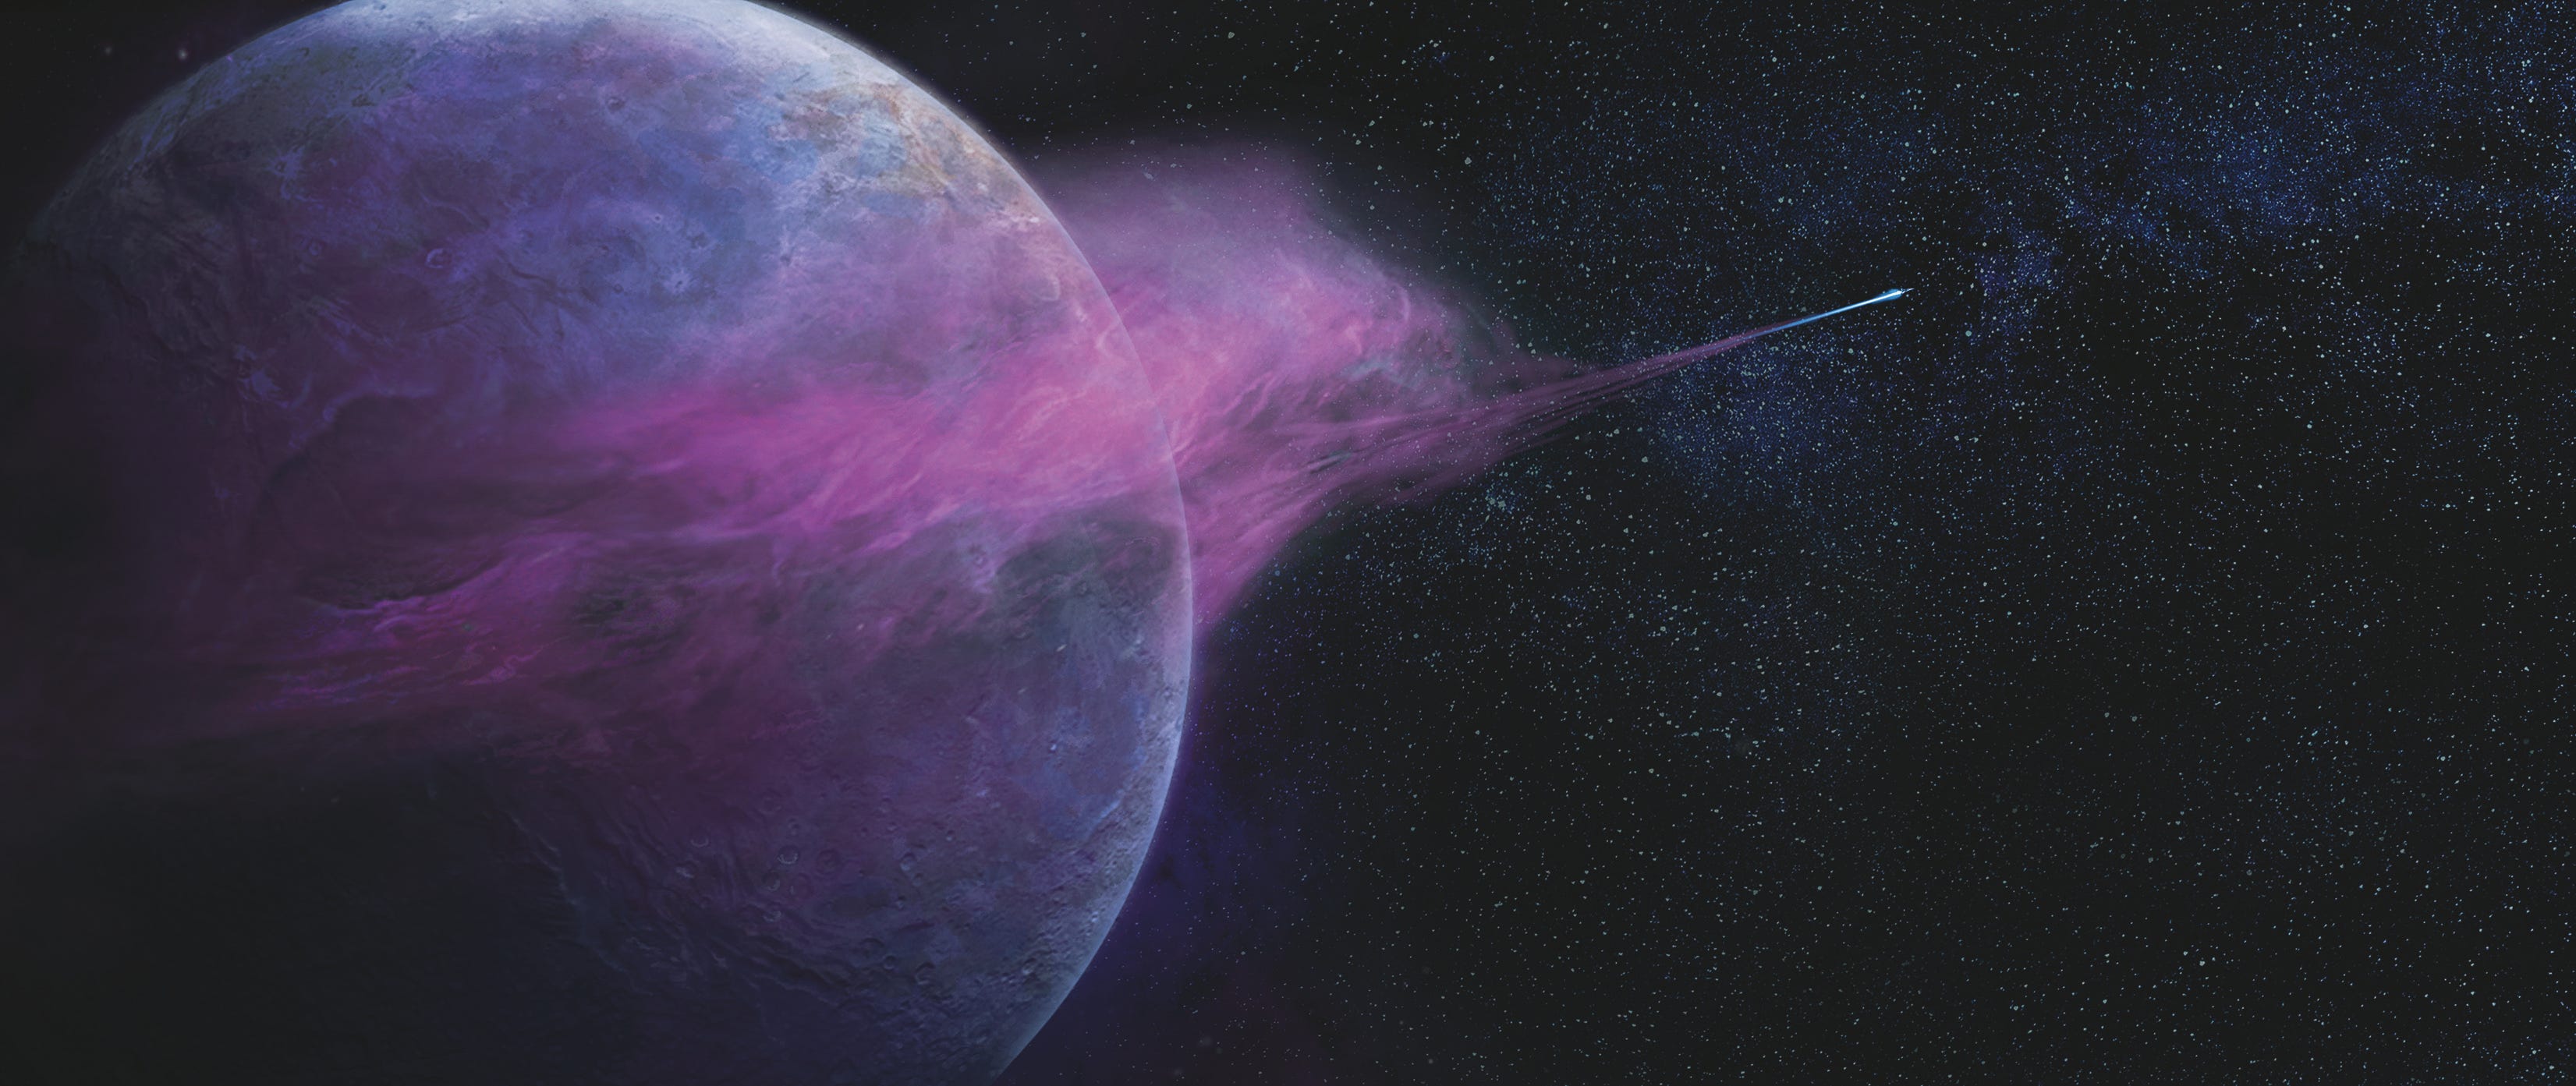 lightyear concept art, with a shuttle leaving the orbit of a purple-tinged planet, rocketing into space with a trail of dust in its wake